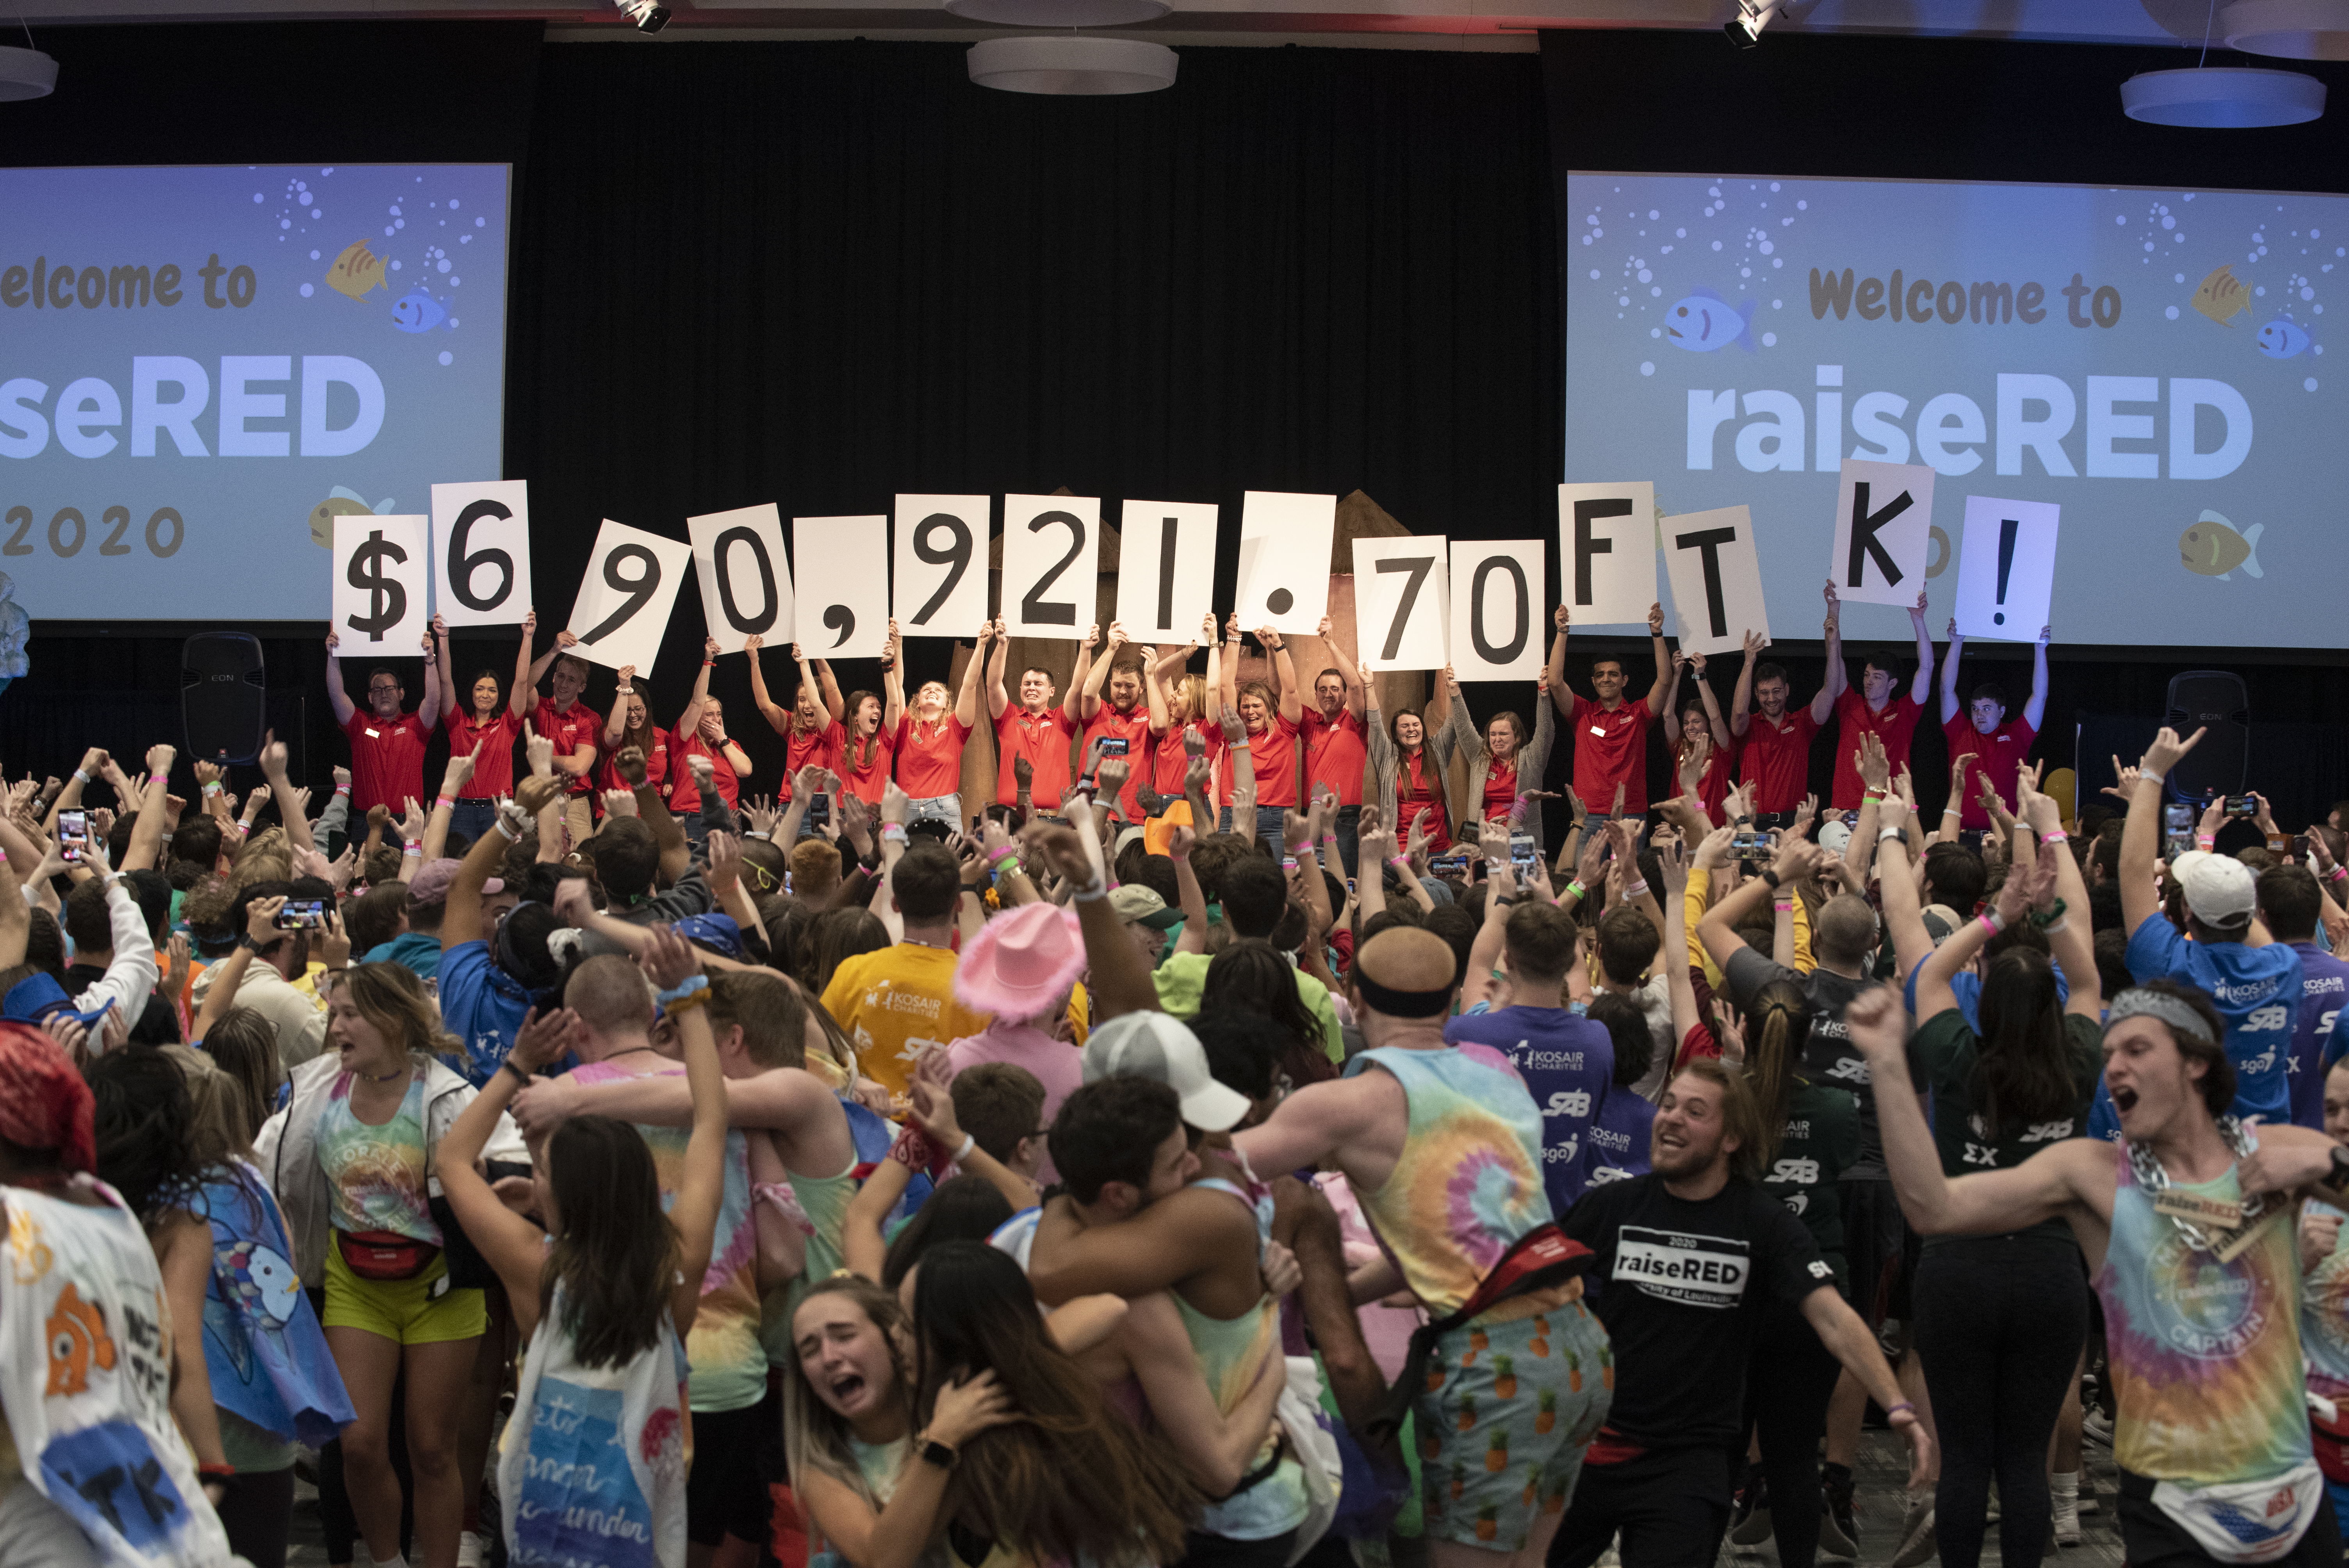 This year's raiseRED dance marathon will look different than this, with mostly virtual events, but the goal is the same: to fight pediatric cancer.